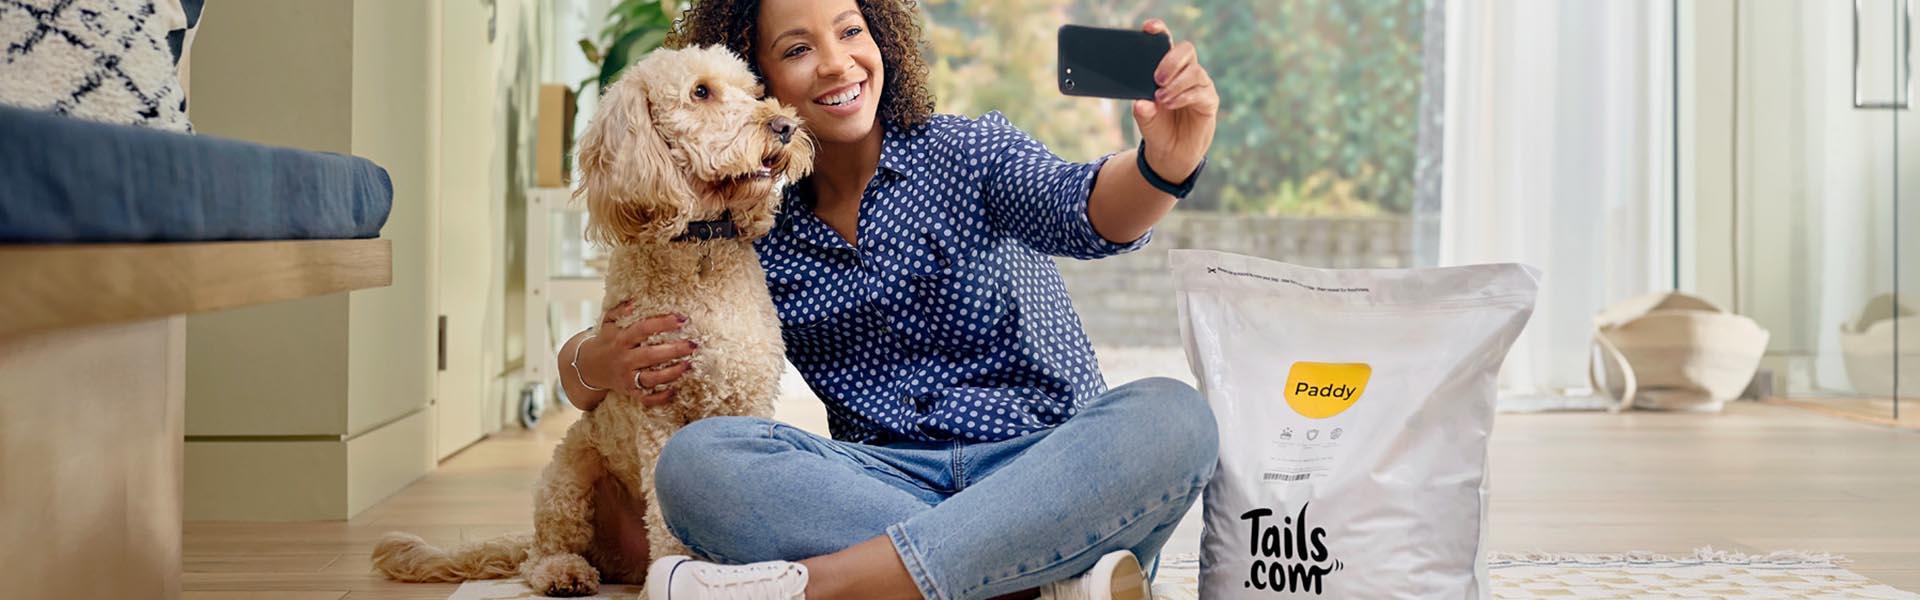 Woman doing selfie with her dog